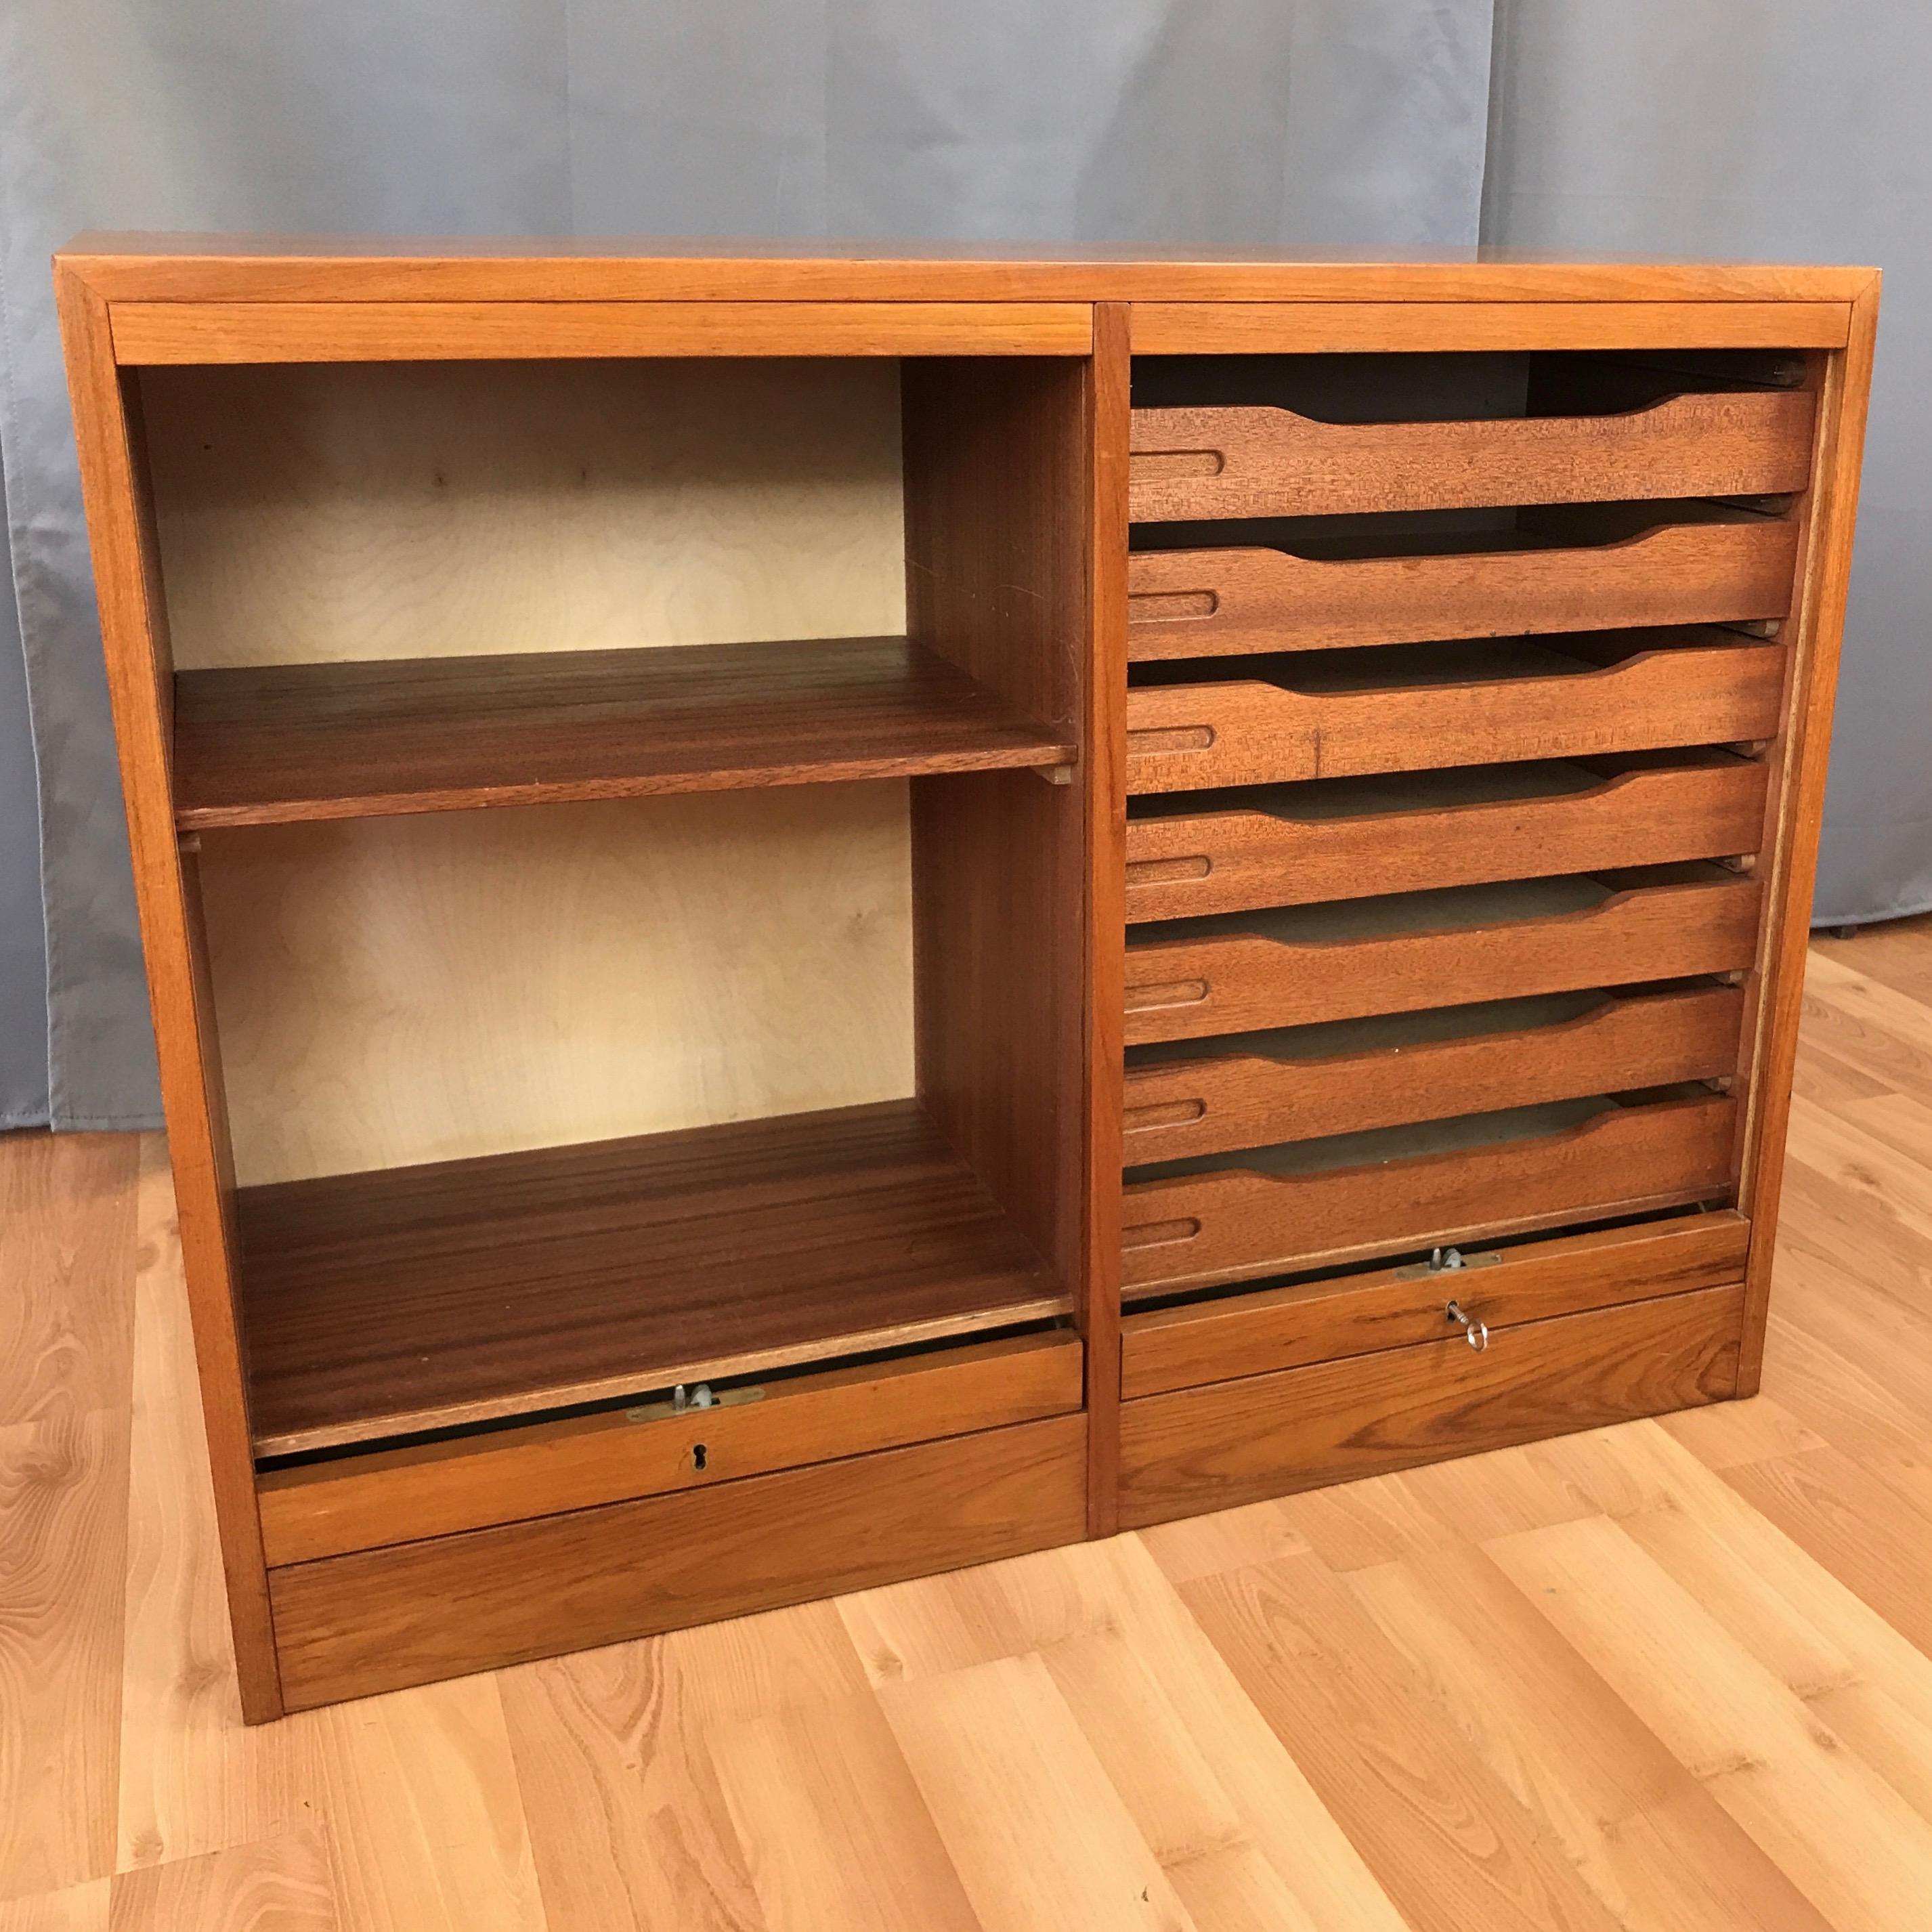 A vintage Danish dual compartment teak file cabinet with locking tambour doors.

Very clean design features smooth front tambour doors that roll down into the base and out of sight. A cabinet with removable shelf is on the left, while a cabinet with